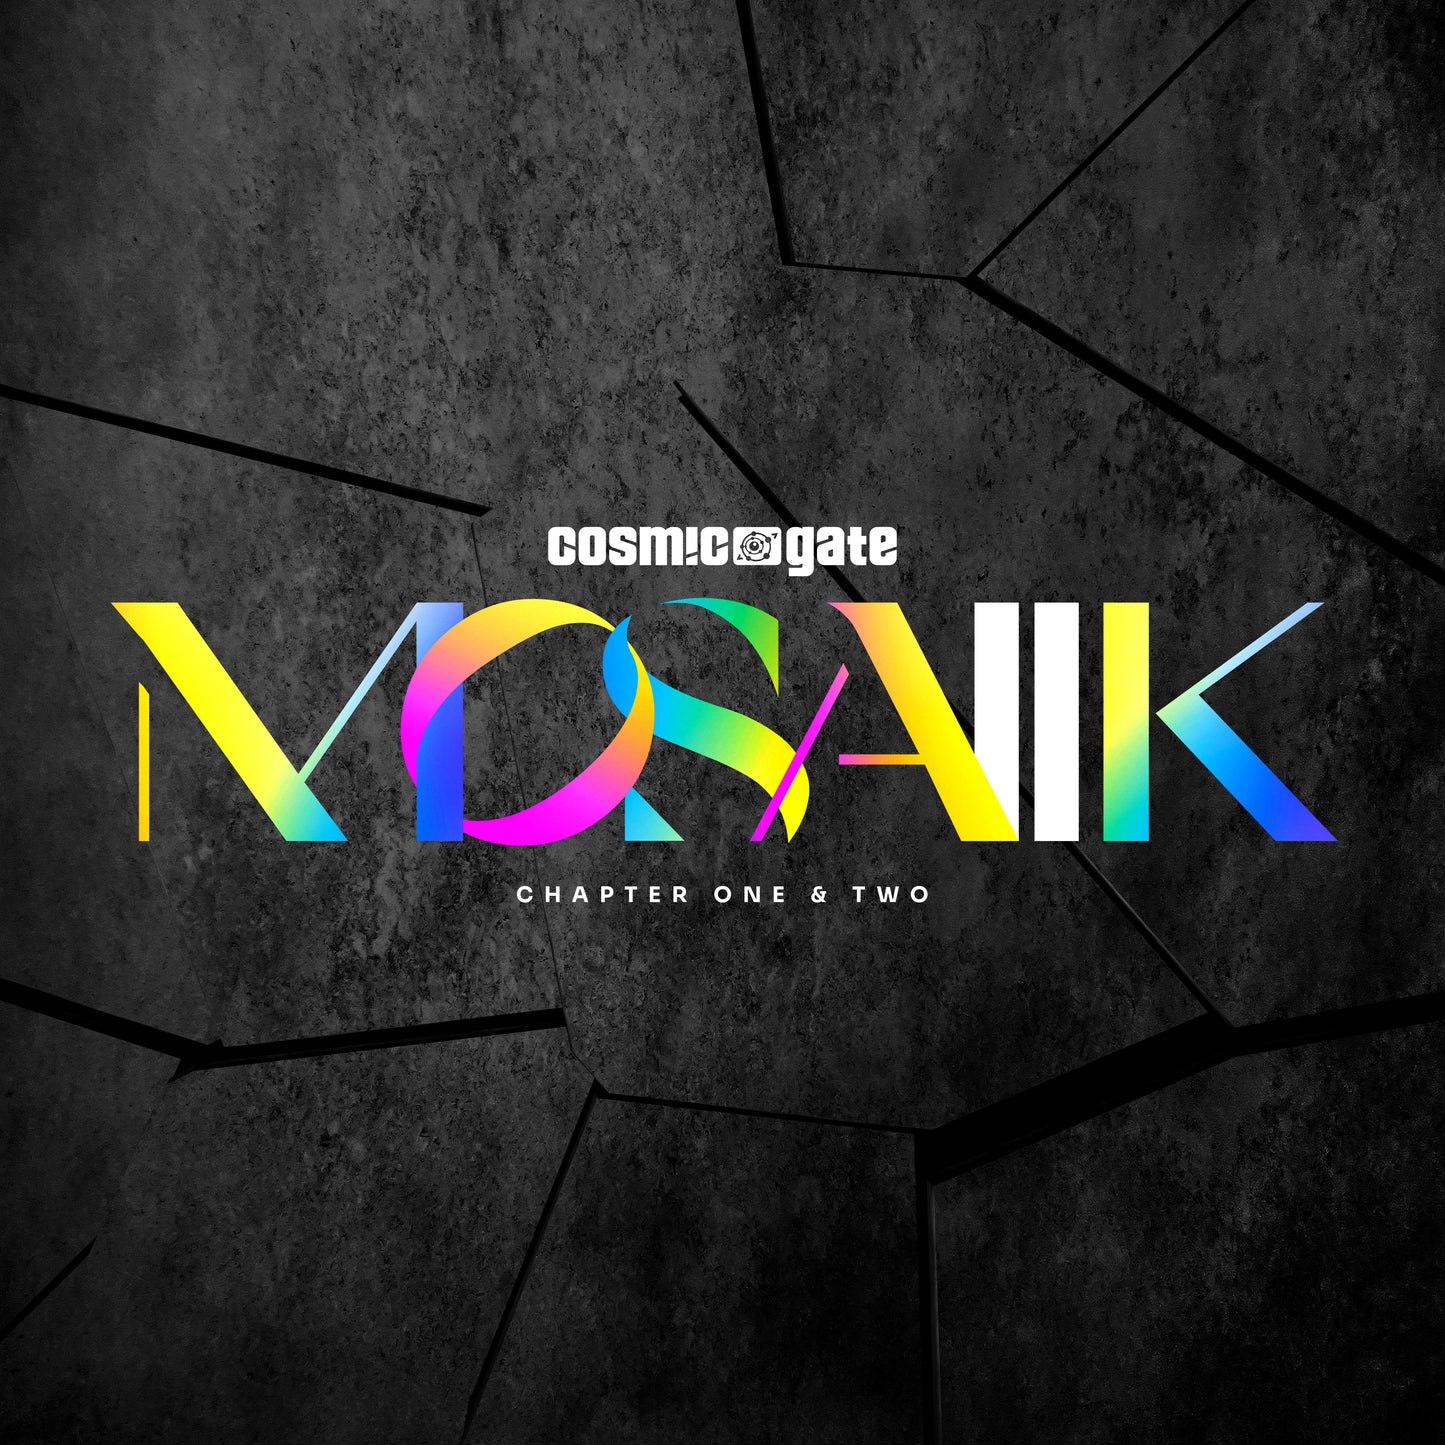 Cosmic Gate - MOSAIIK Chapter One & Two